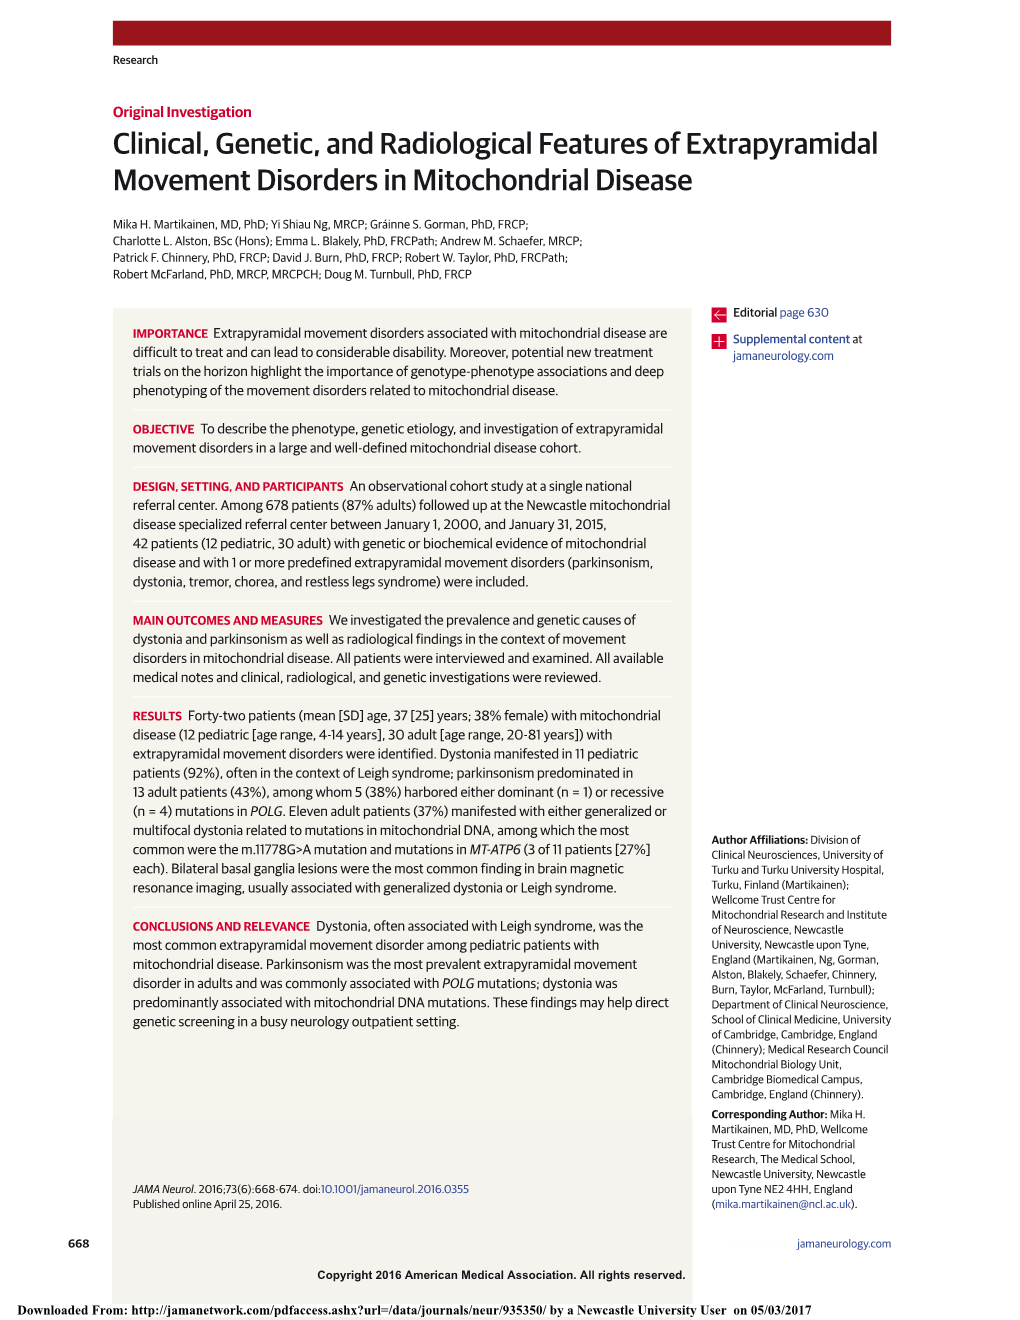 Clinical, Genetic, and Radiological Features of Extrapyramidal Movement Disorders in Mitochondrial Disease